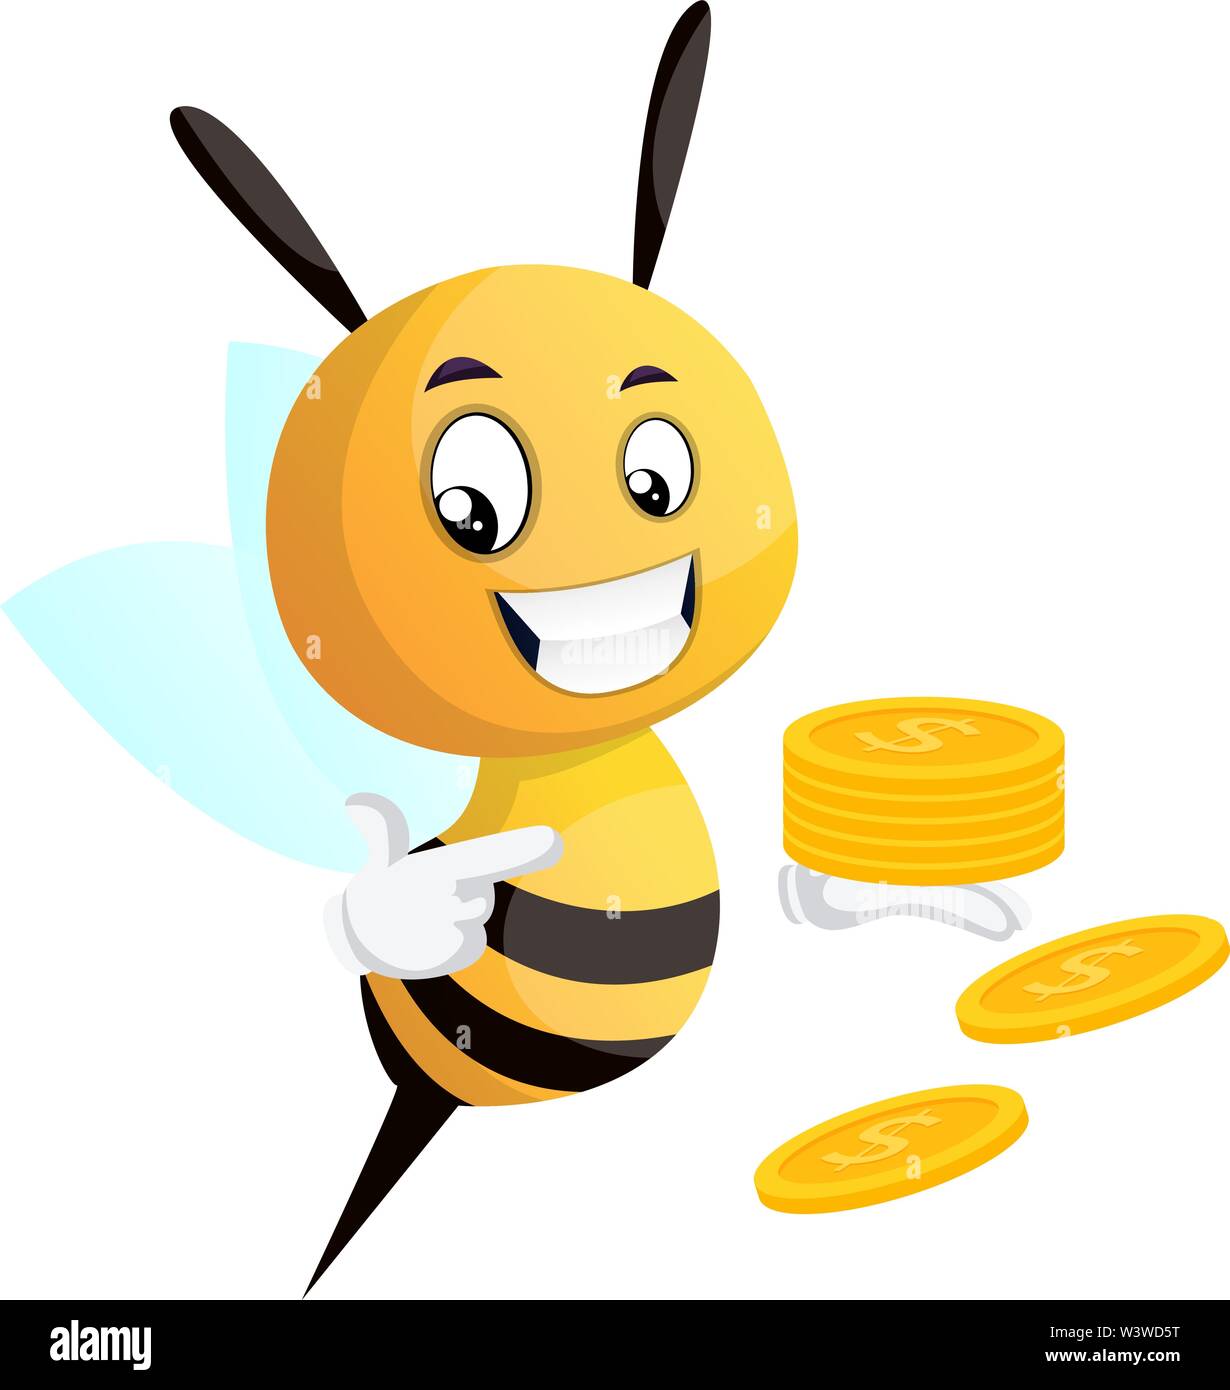 Bee pointing on the coins, bee holding coins, illustration, vector on white background. Stock Vector